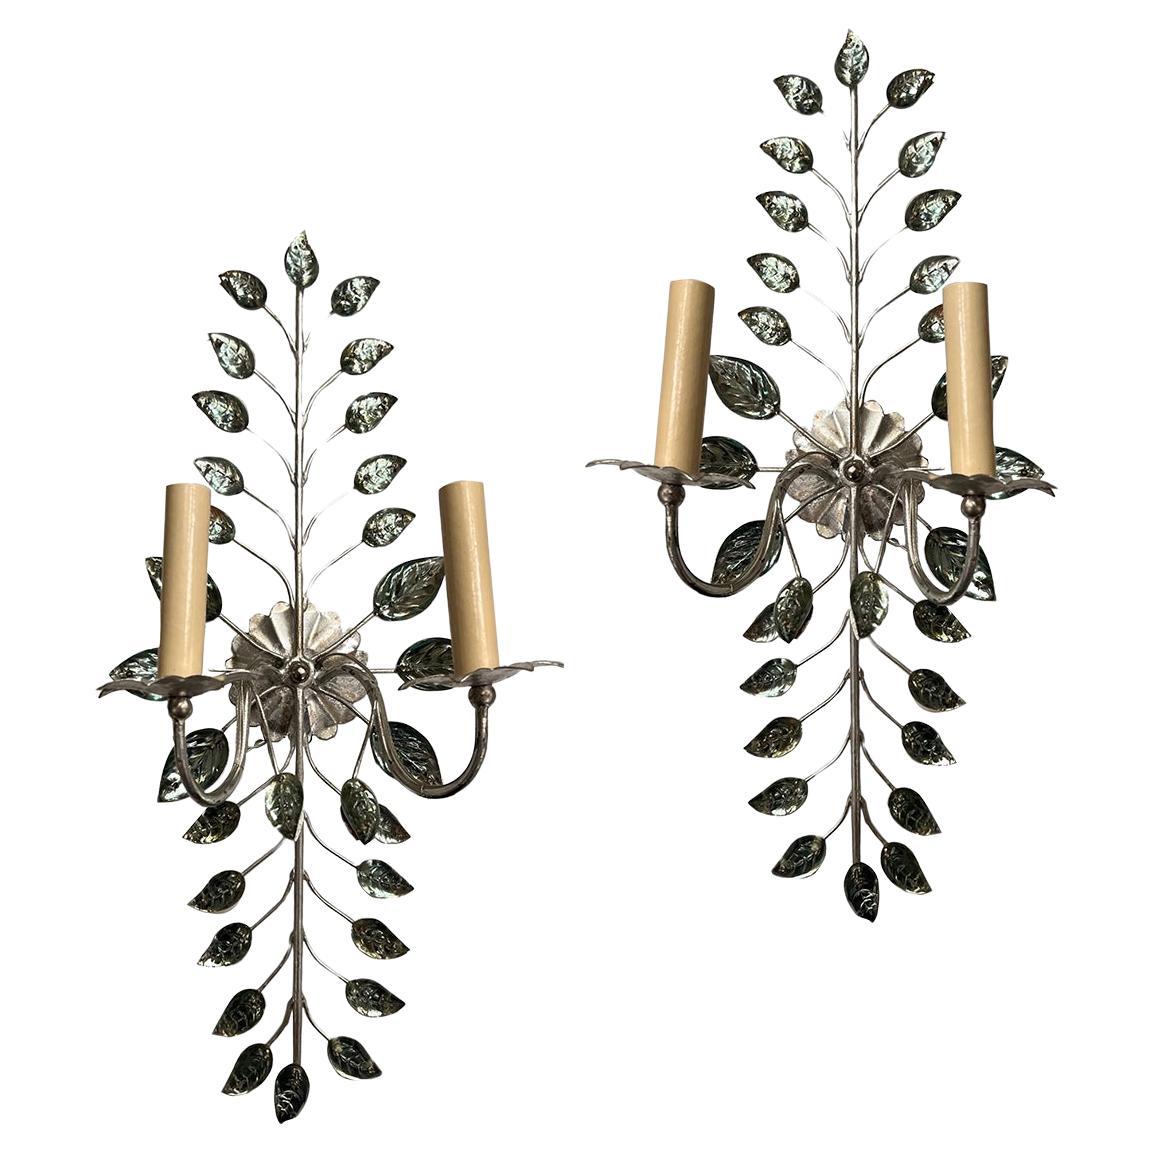 Set of French Silver-Leaf Sconces, Sold Per Pair